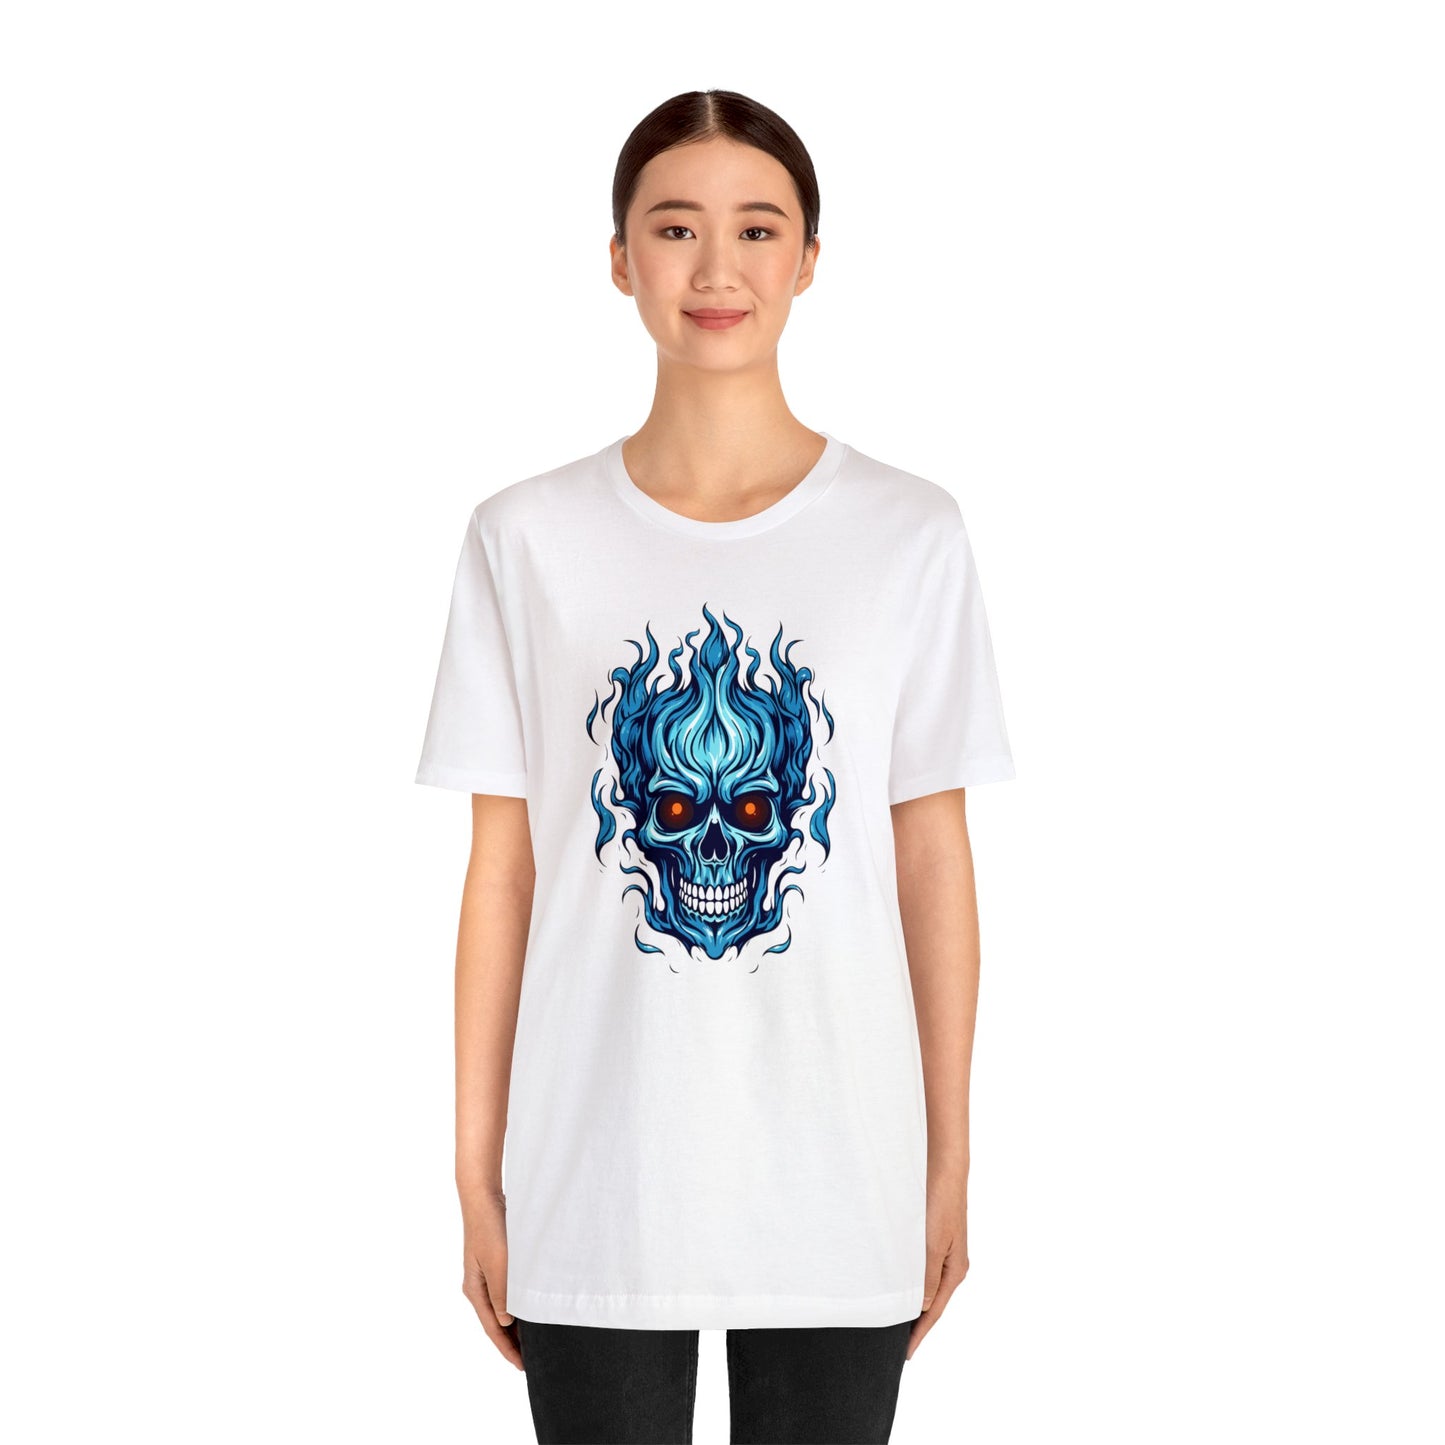 Men's Jersey Short Sleeve Tee - Blue Flaming Skull T-Shirt, Sizes Small To 3XL